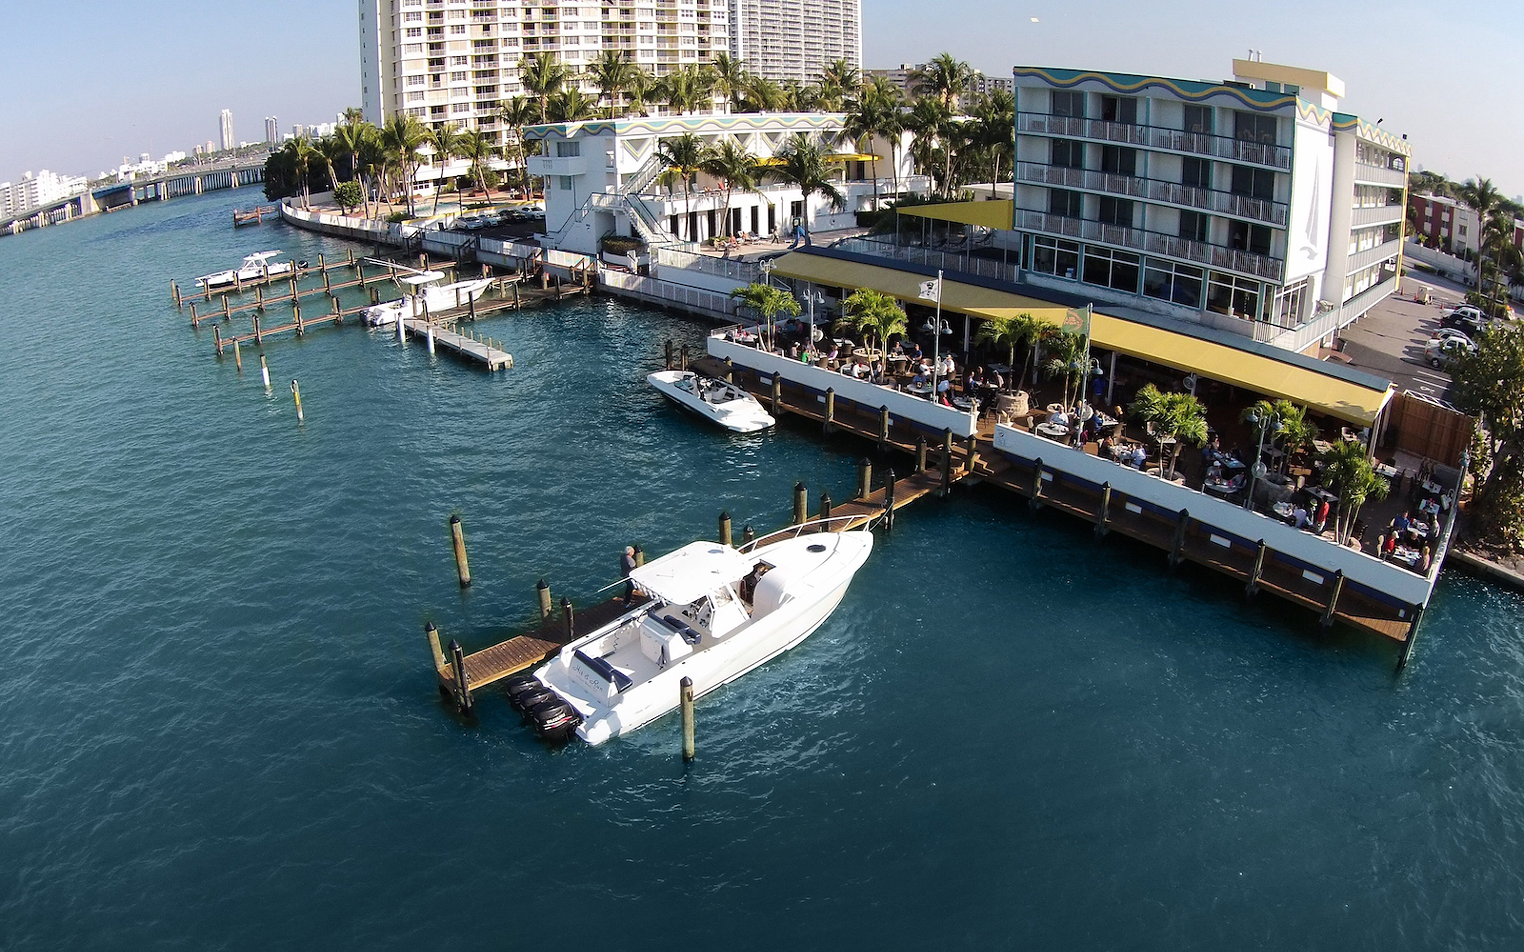 Zuma Miami Introduces Yacht Catering Menu and Dockside Dining